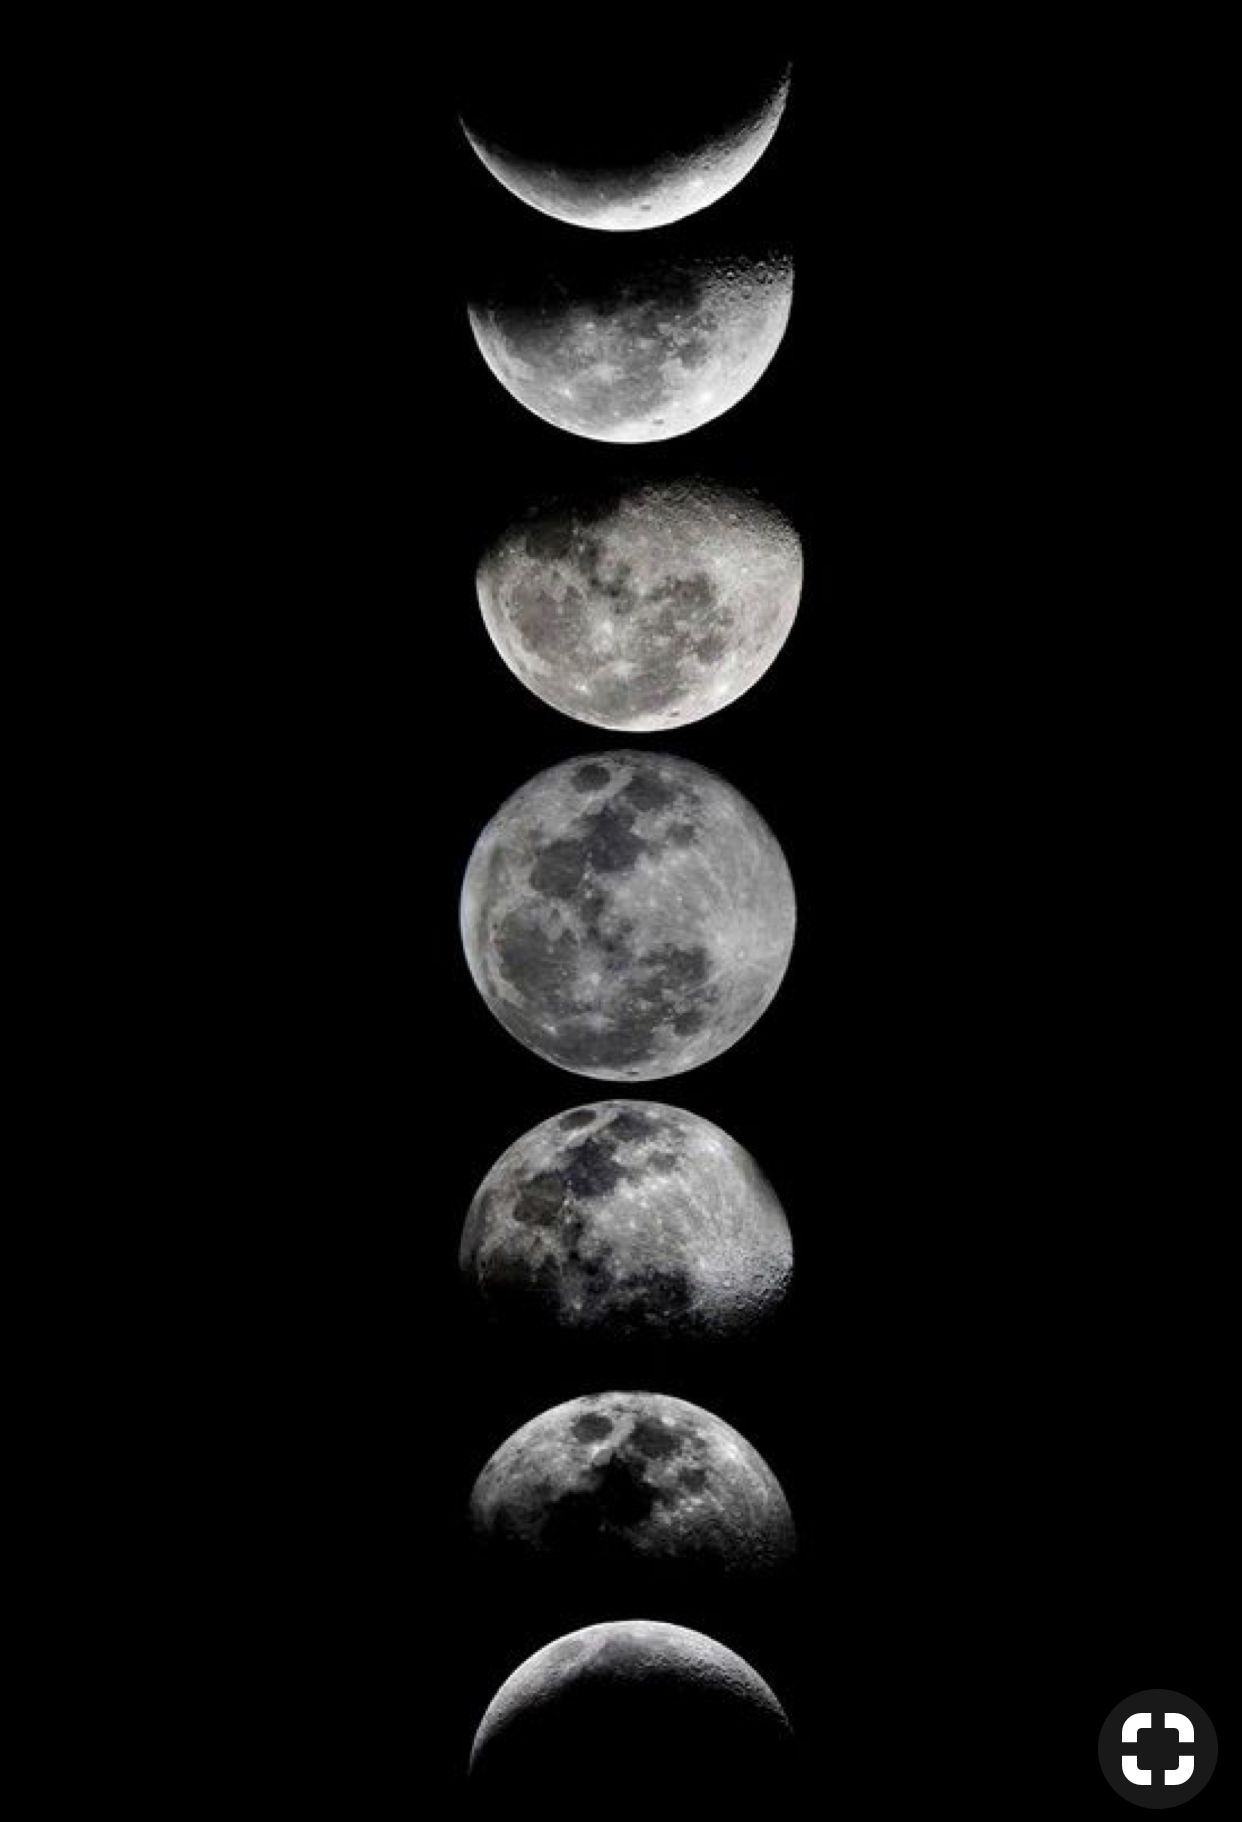 Moon Phases iPhone Wallpapers - Wallpaper Cave